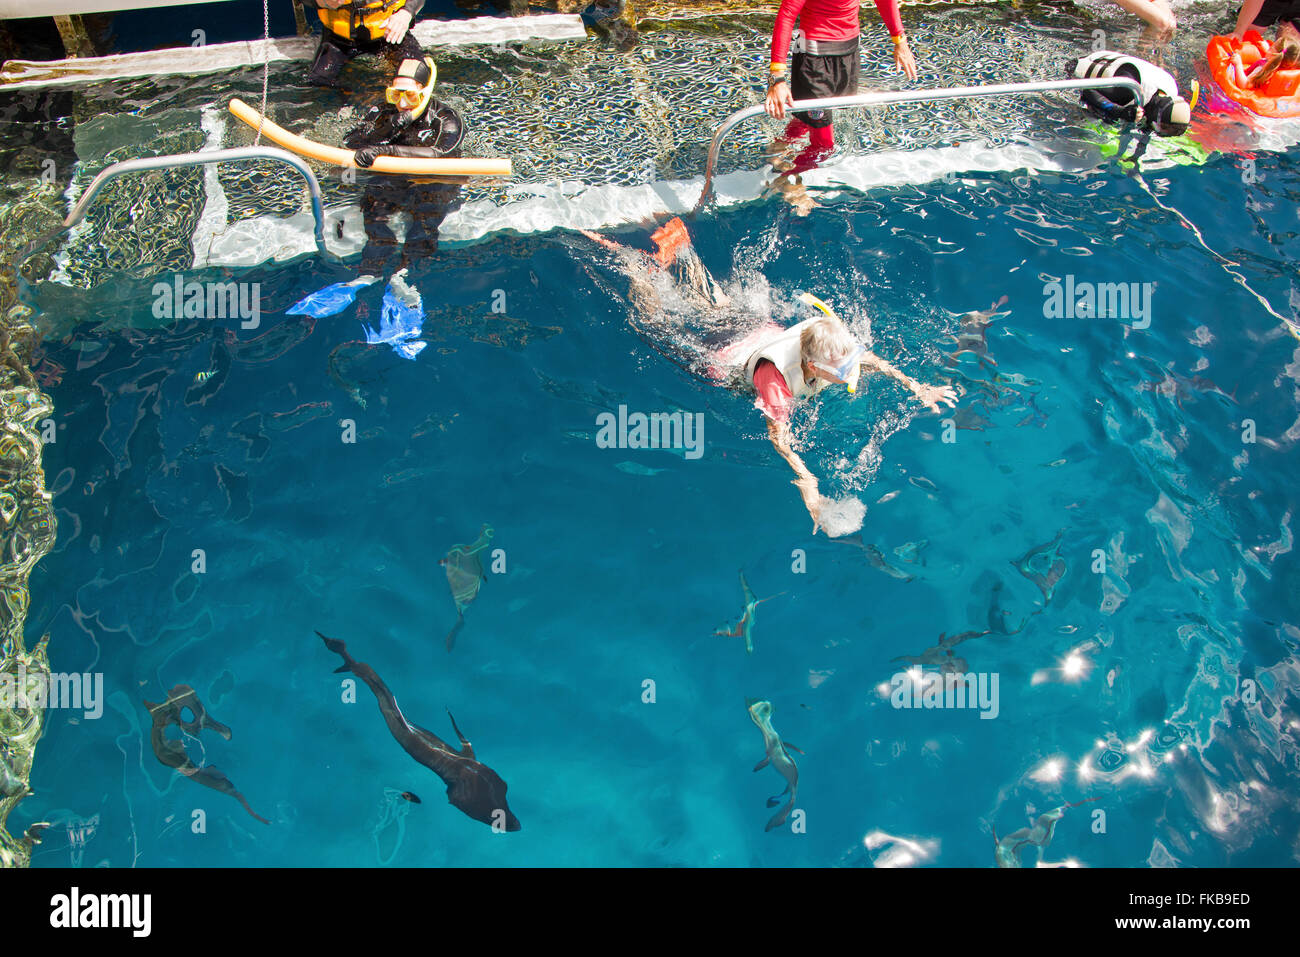 Tourists wearing diving suits and snorkels, in the introductory diving pool with various sized tropical fish. The pool is attach Stock Photo